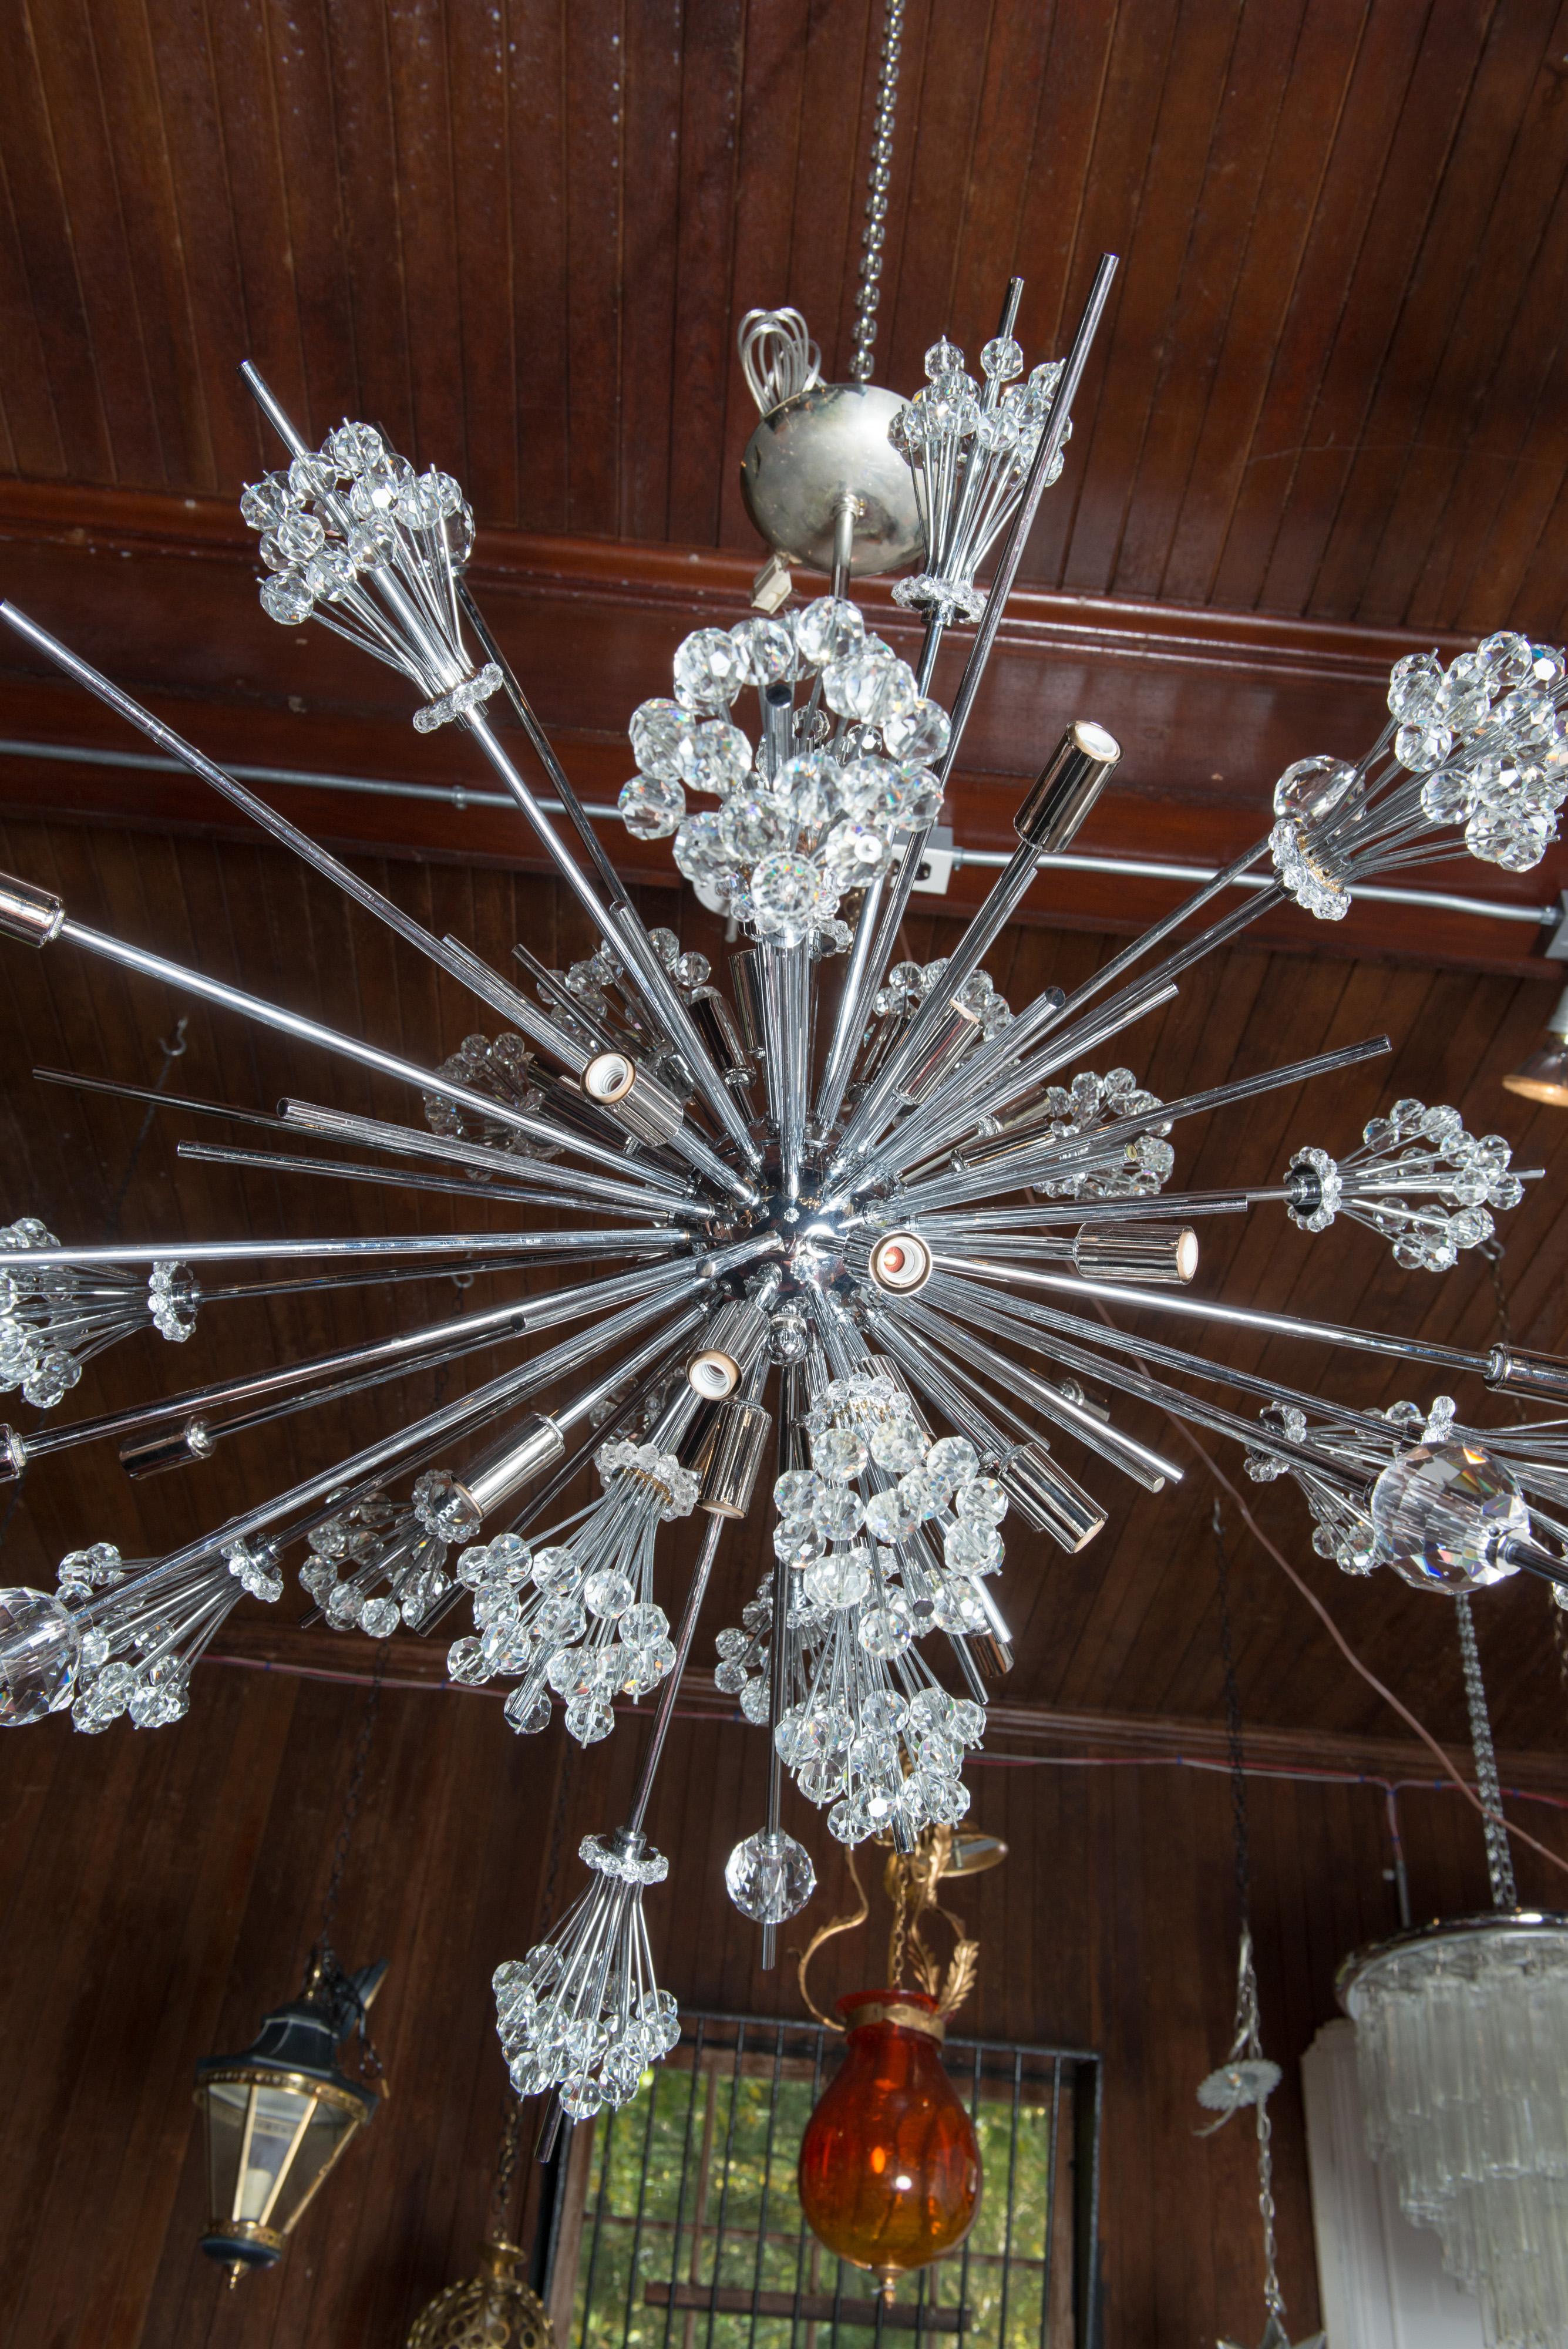 Metropolitan Opera starburst chandeliers were originally made by Hans Harald Rath of the Austrian company, J. & L. Lobmeyr in 1966. This starburst chandelier is made by Lobmeyr in chrome and cut crystal. The chandelier holds 30 bulbs.